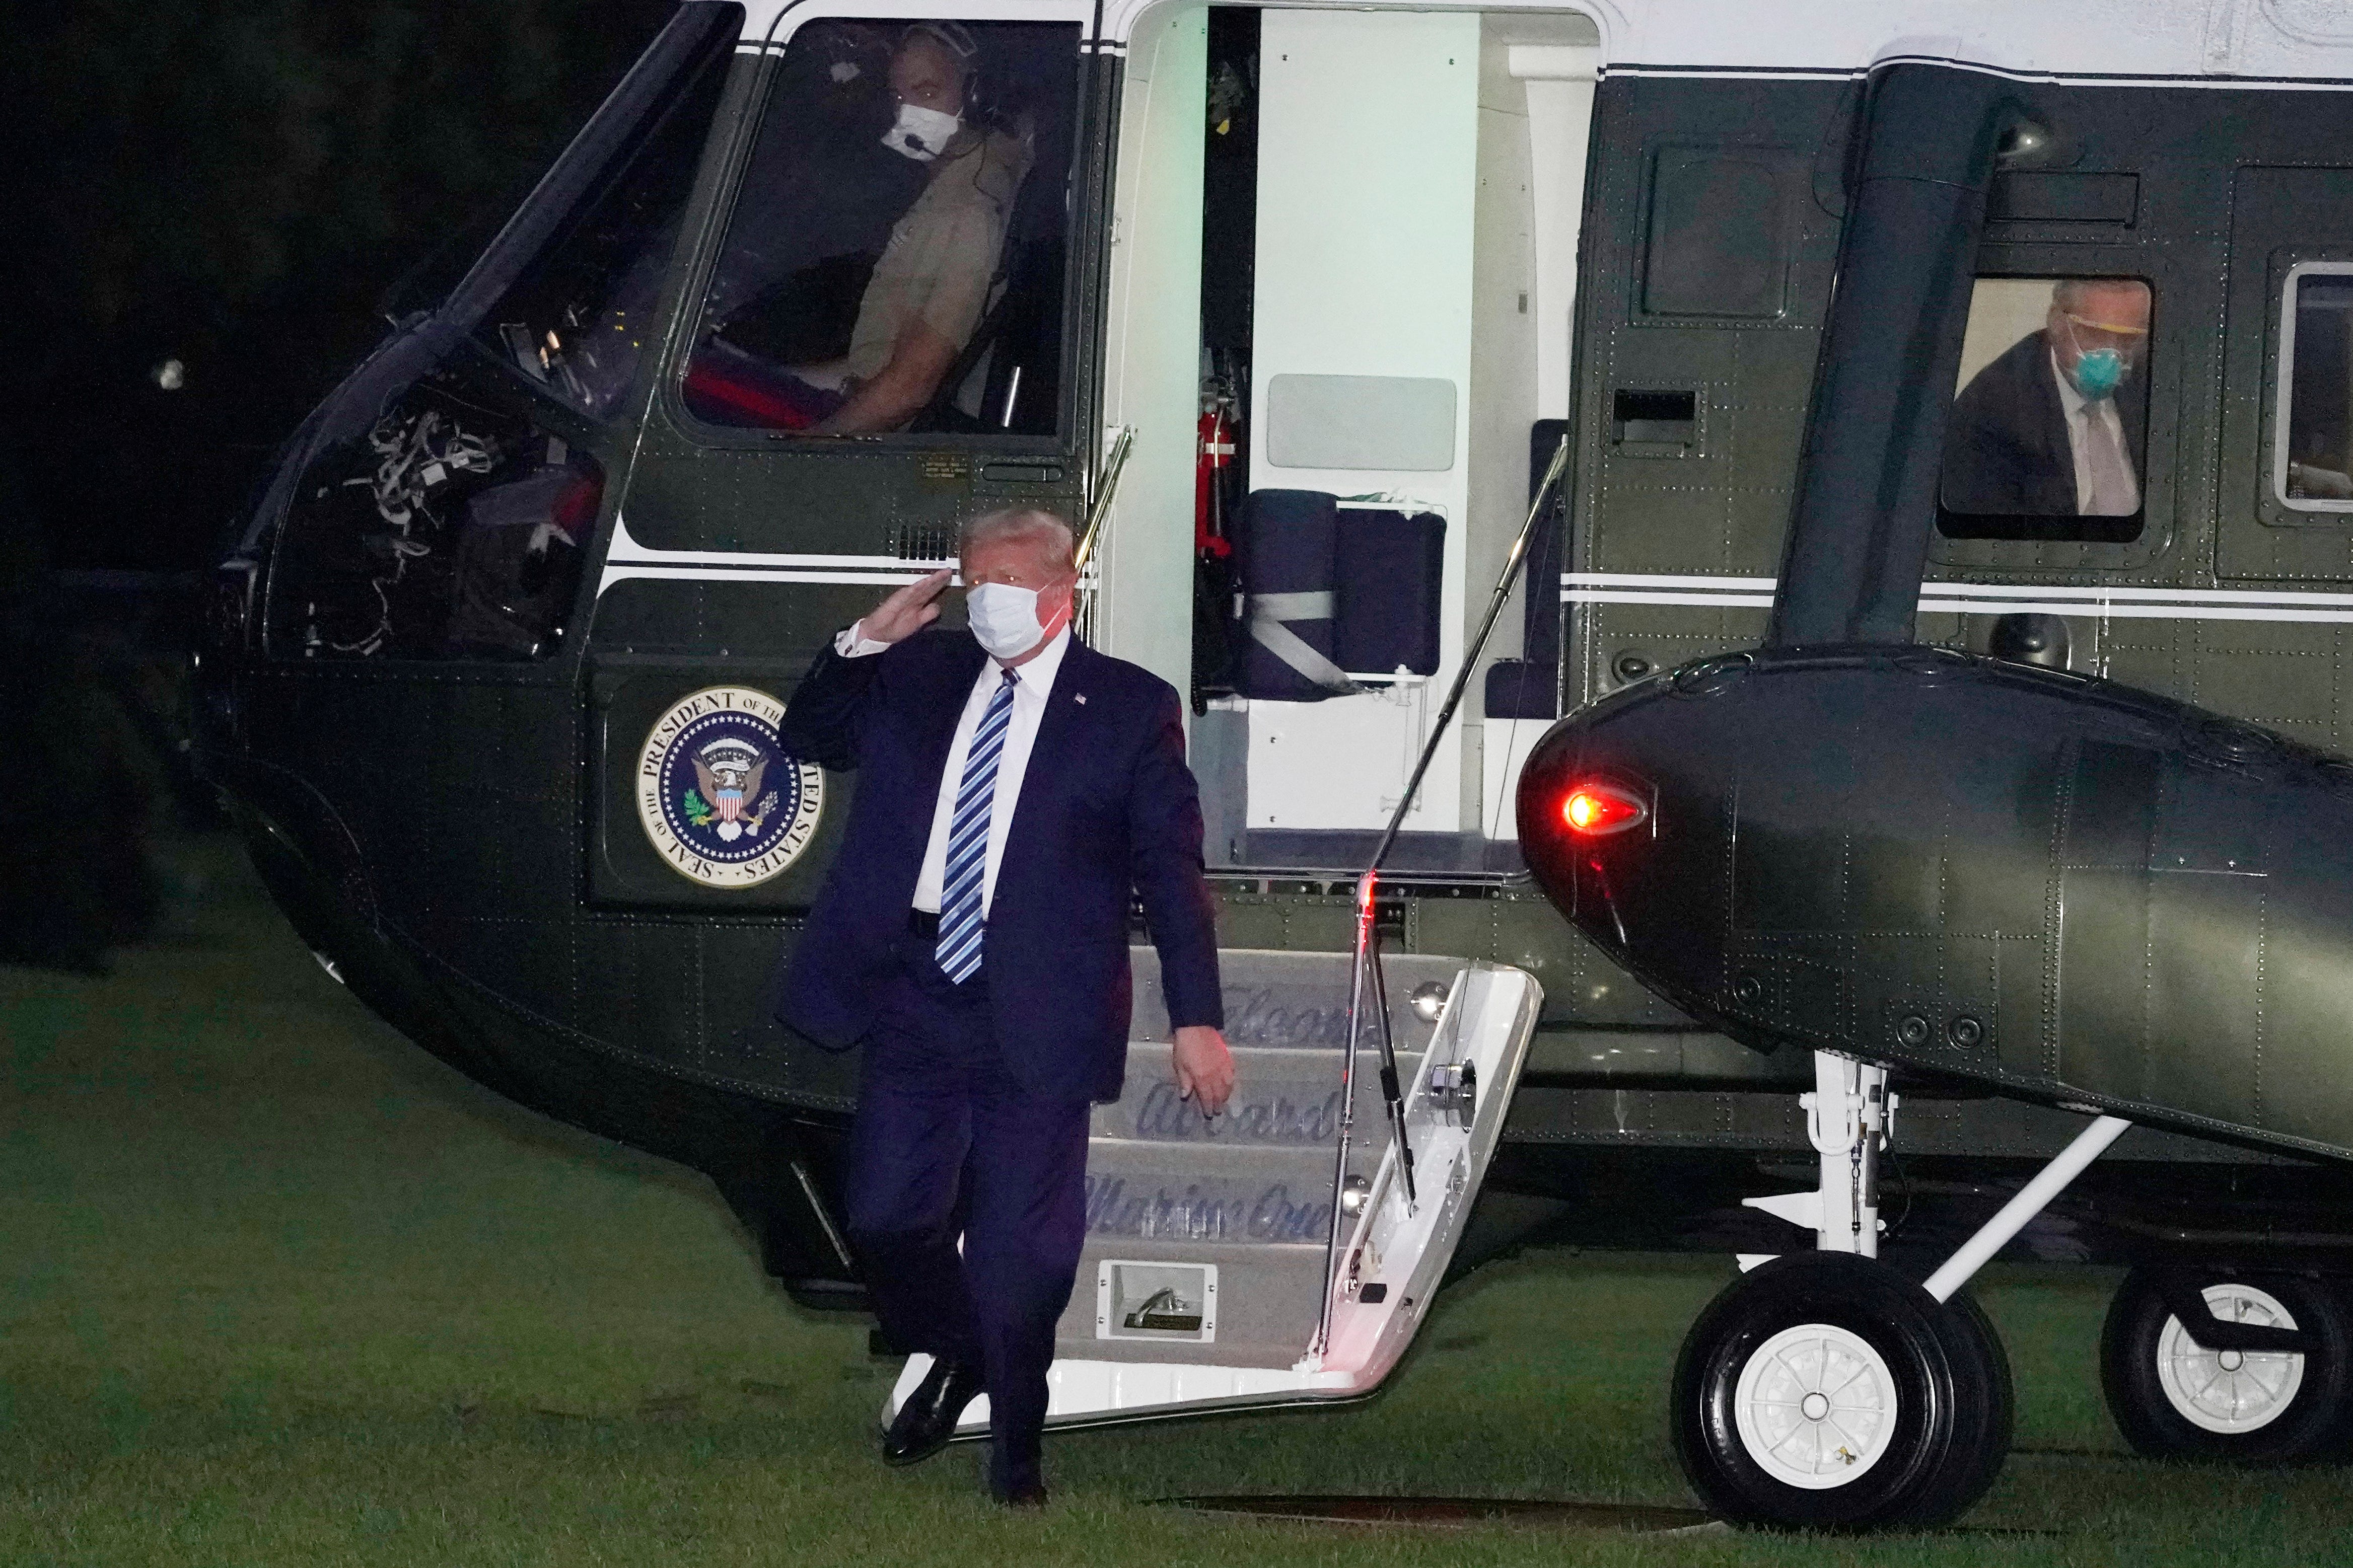 President Donald Trump returns to the White House on Oct. 5 after leaving Walter Reed National Military Medical Center in Bethesda, Md. Trump announced he tested positive for COVID-19 on Oct. 2.